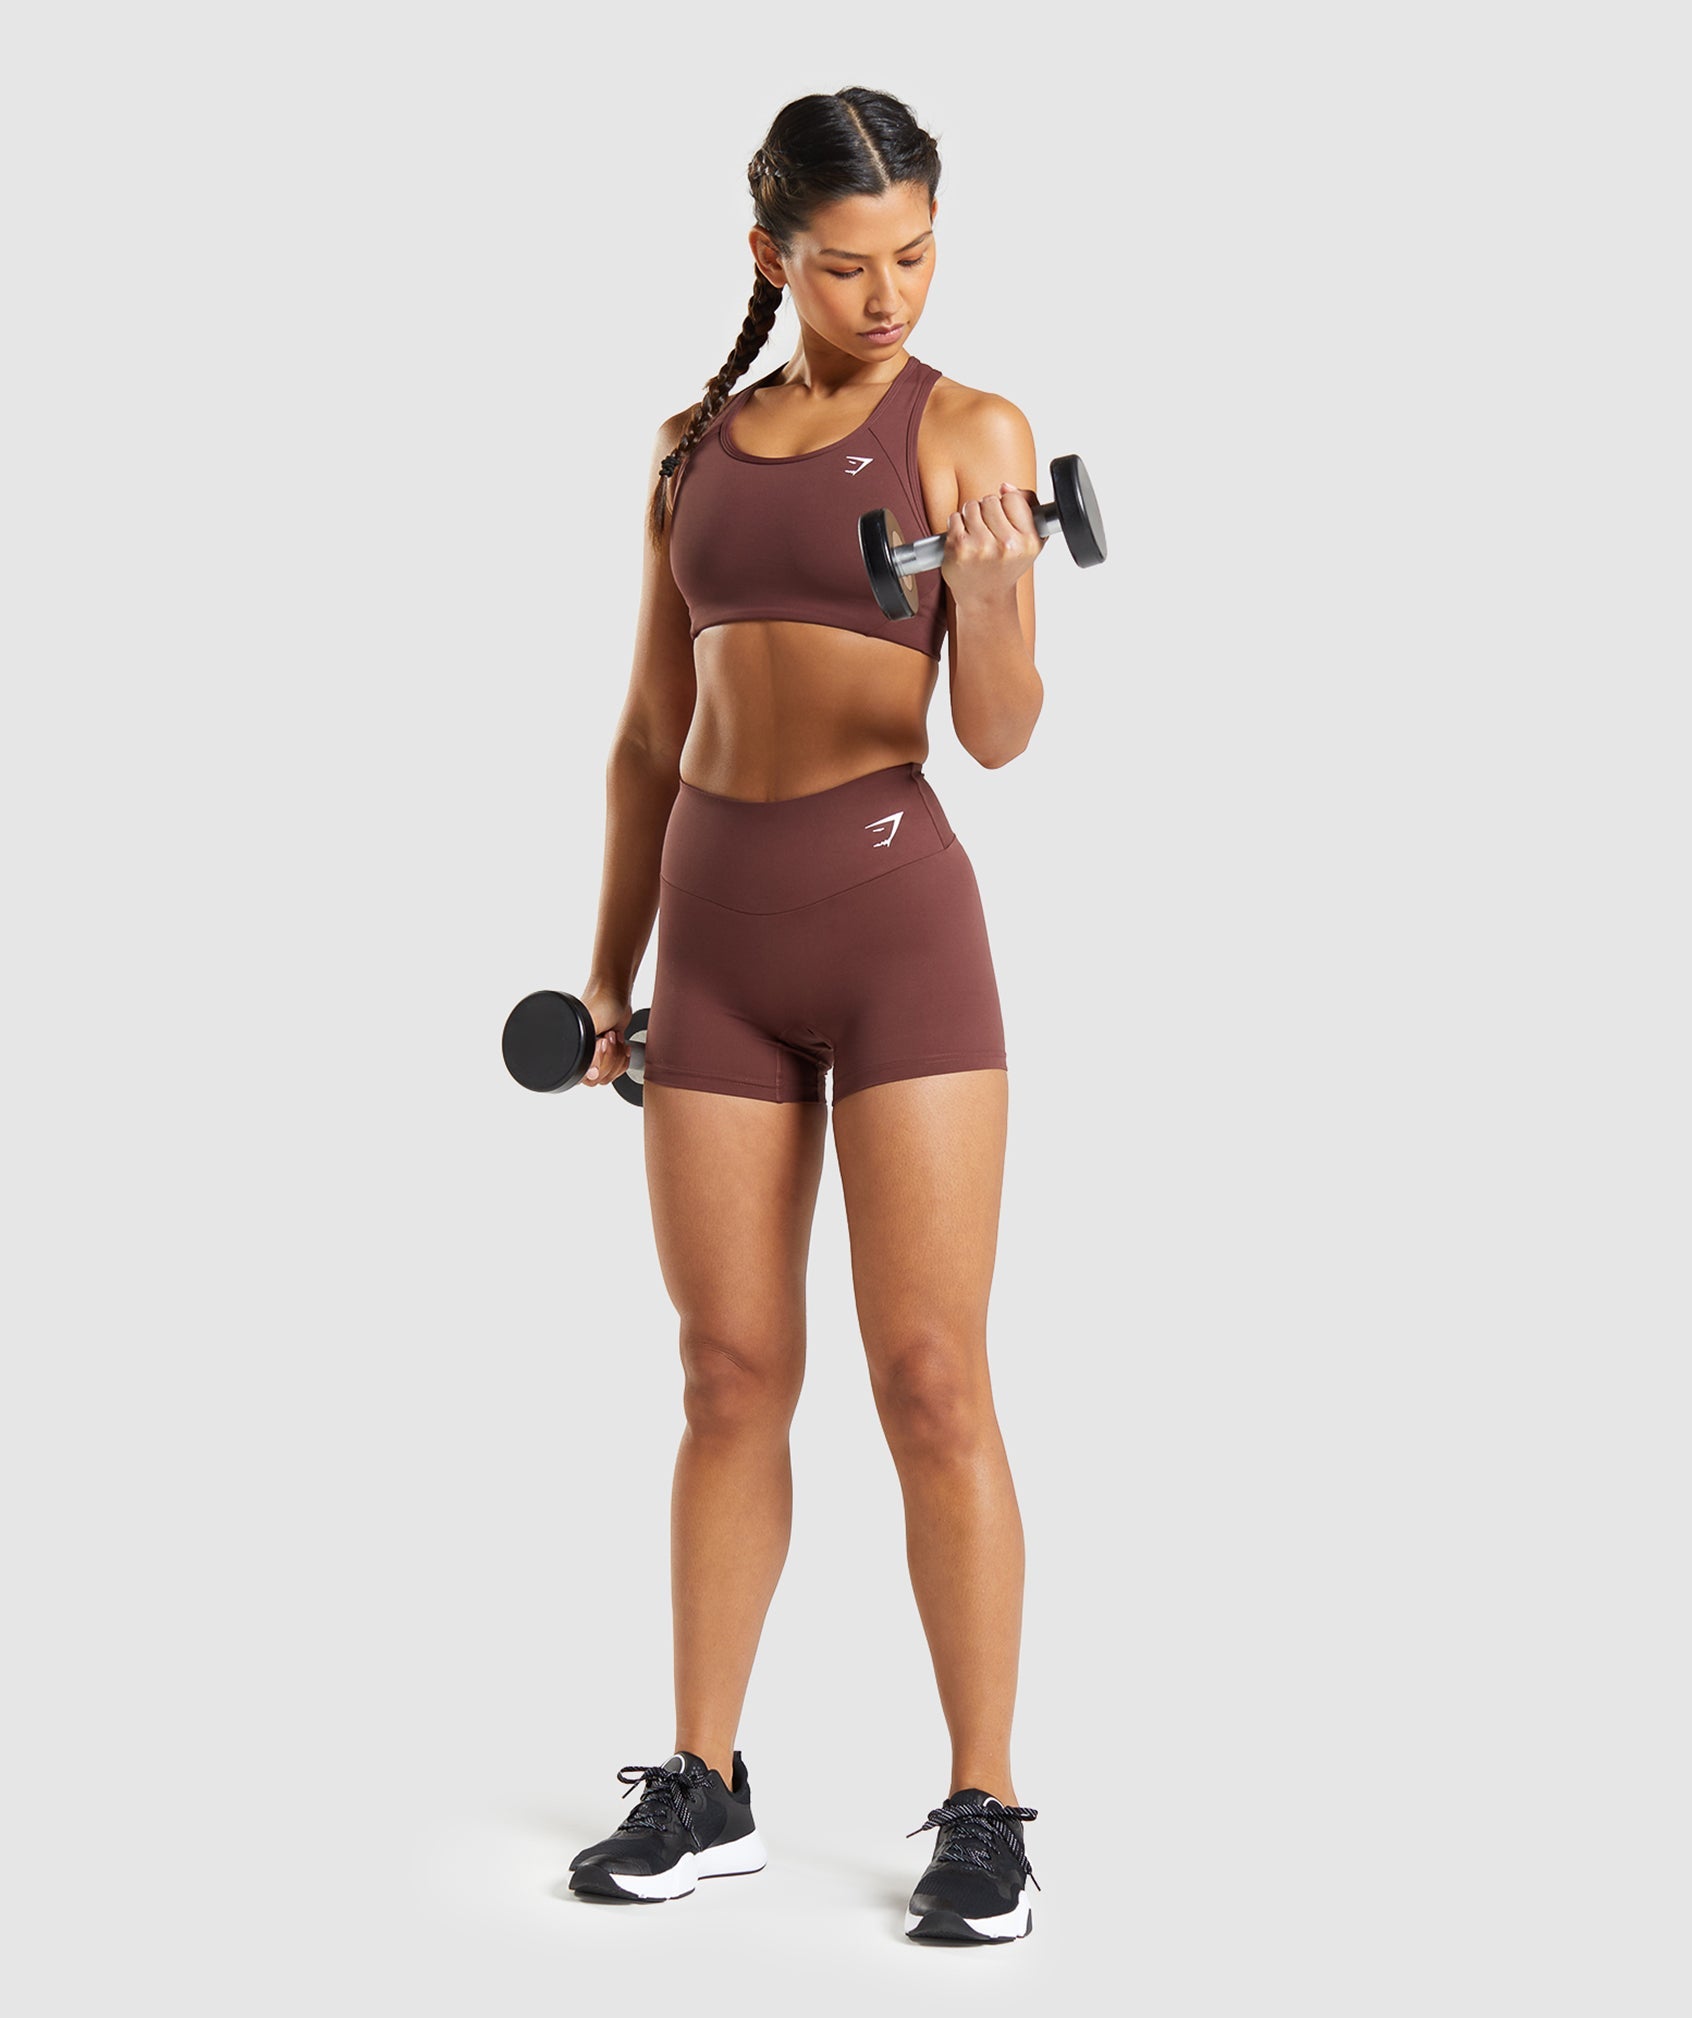 Essential Racer Back Sports Bra in Cherry Brown - view 4